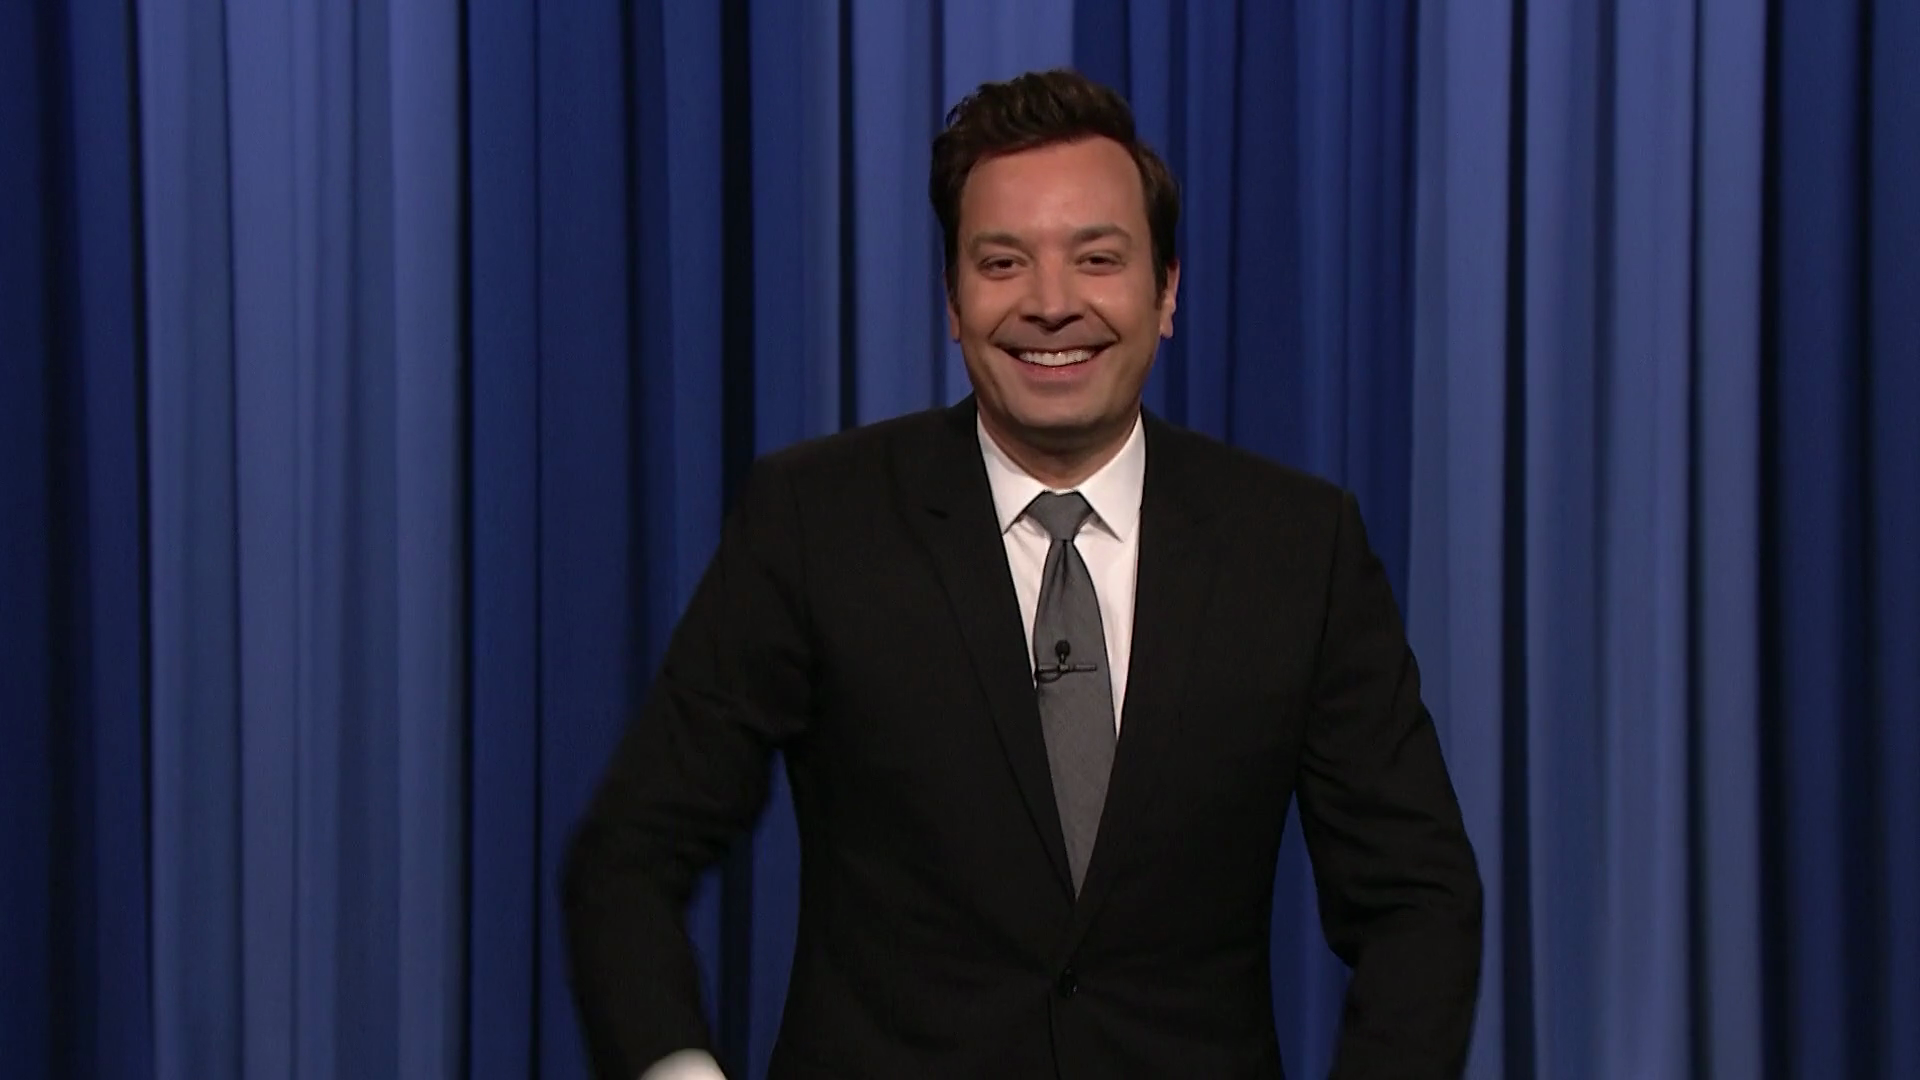 Jimmy Fallon accepts the award for Best Talk/Topical Show.